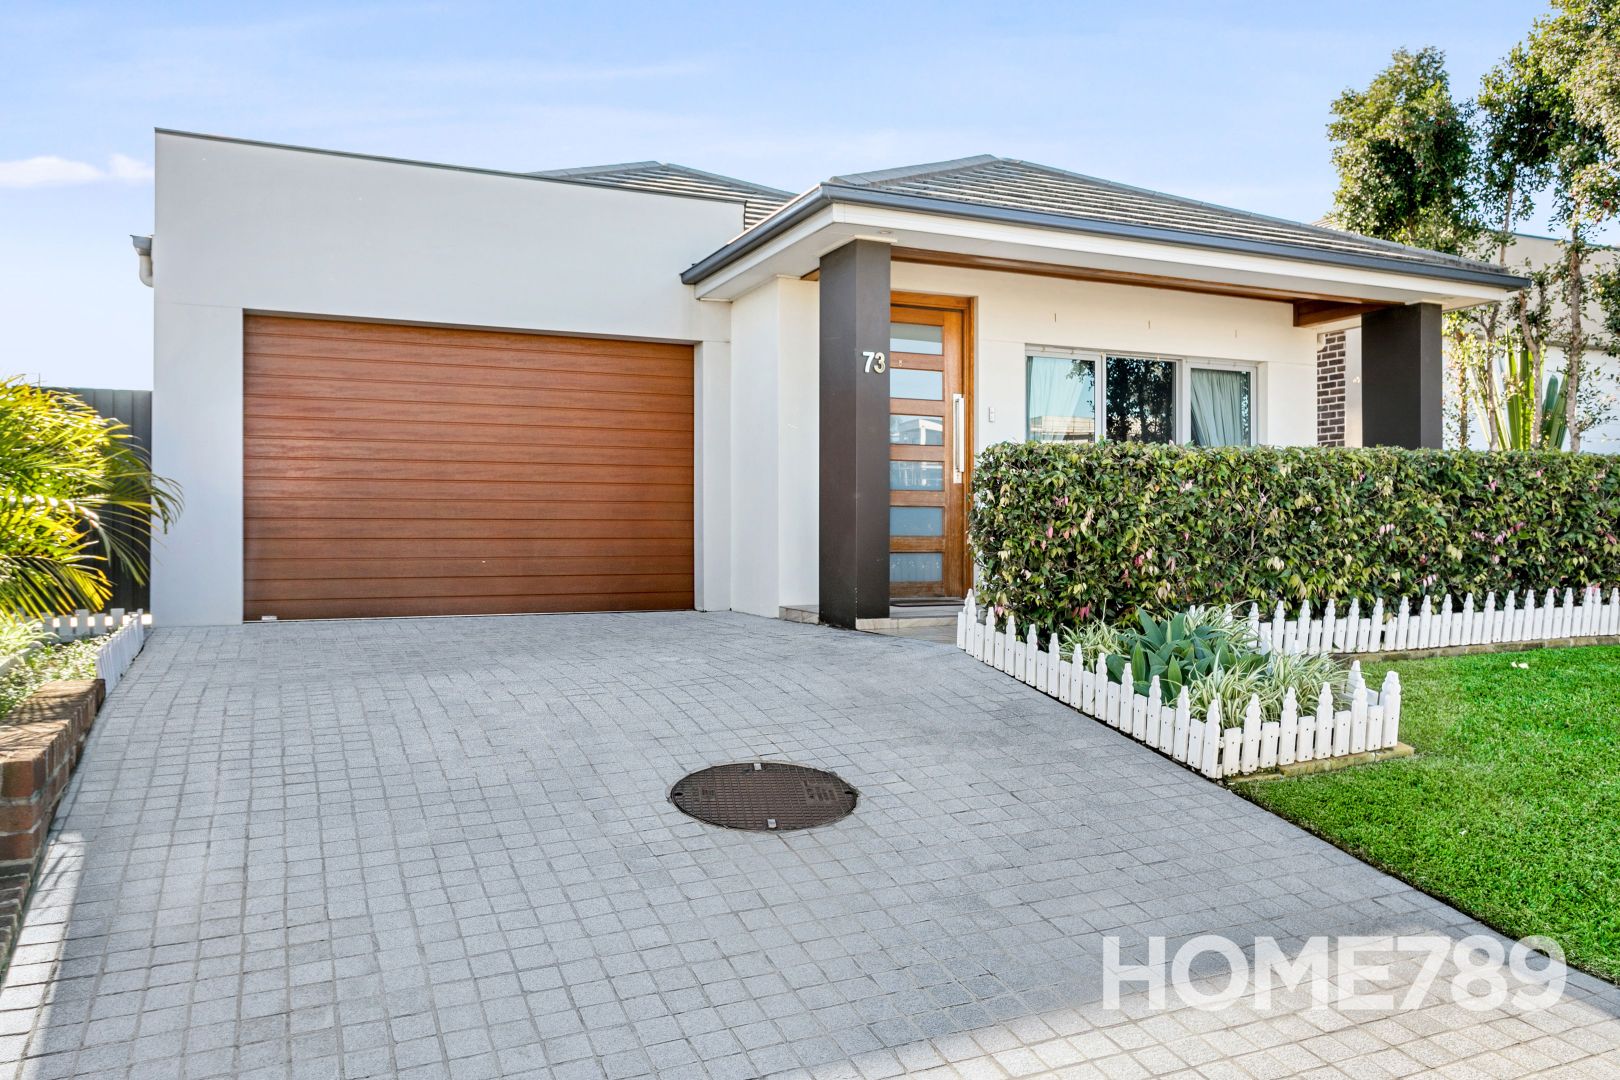 73 Balmoral Road, Kellyville NSW 2155